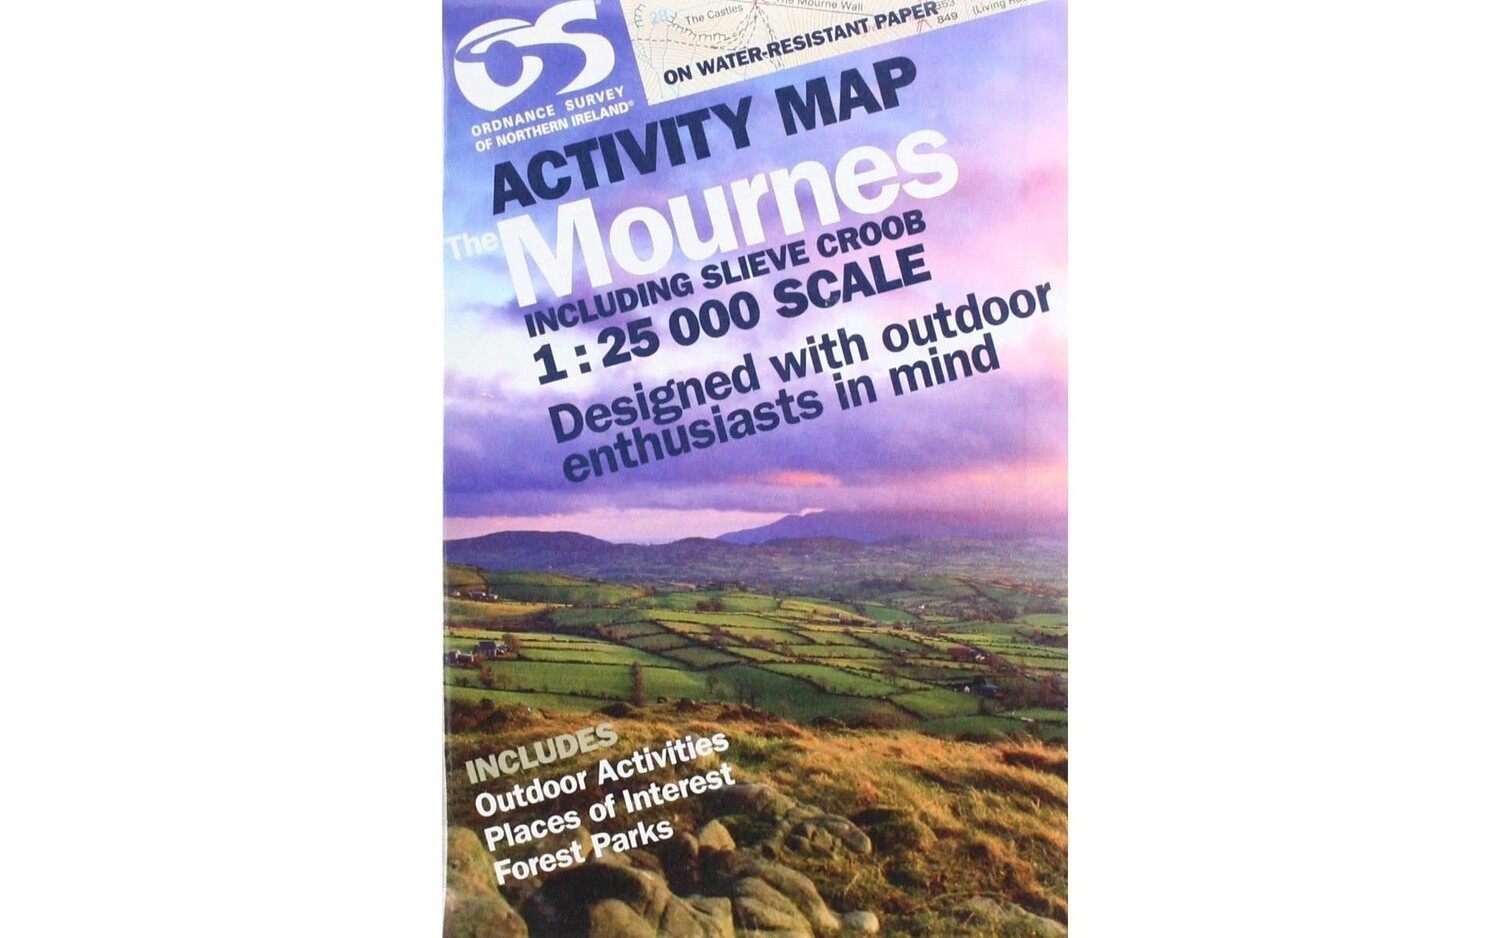 OS Activity Map The Mournes 1:25 000